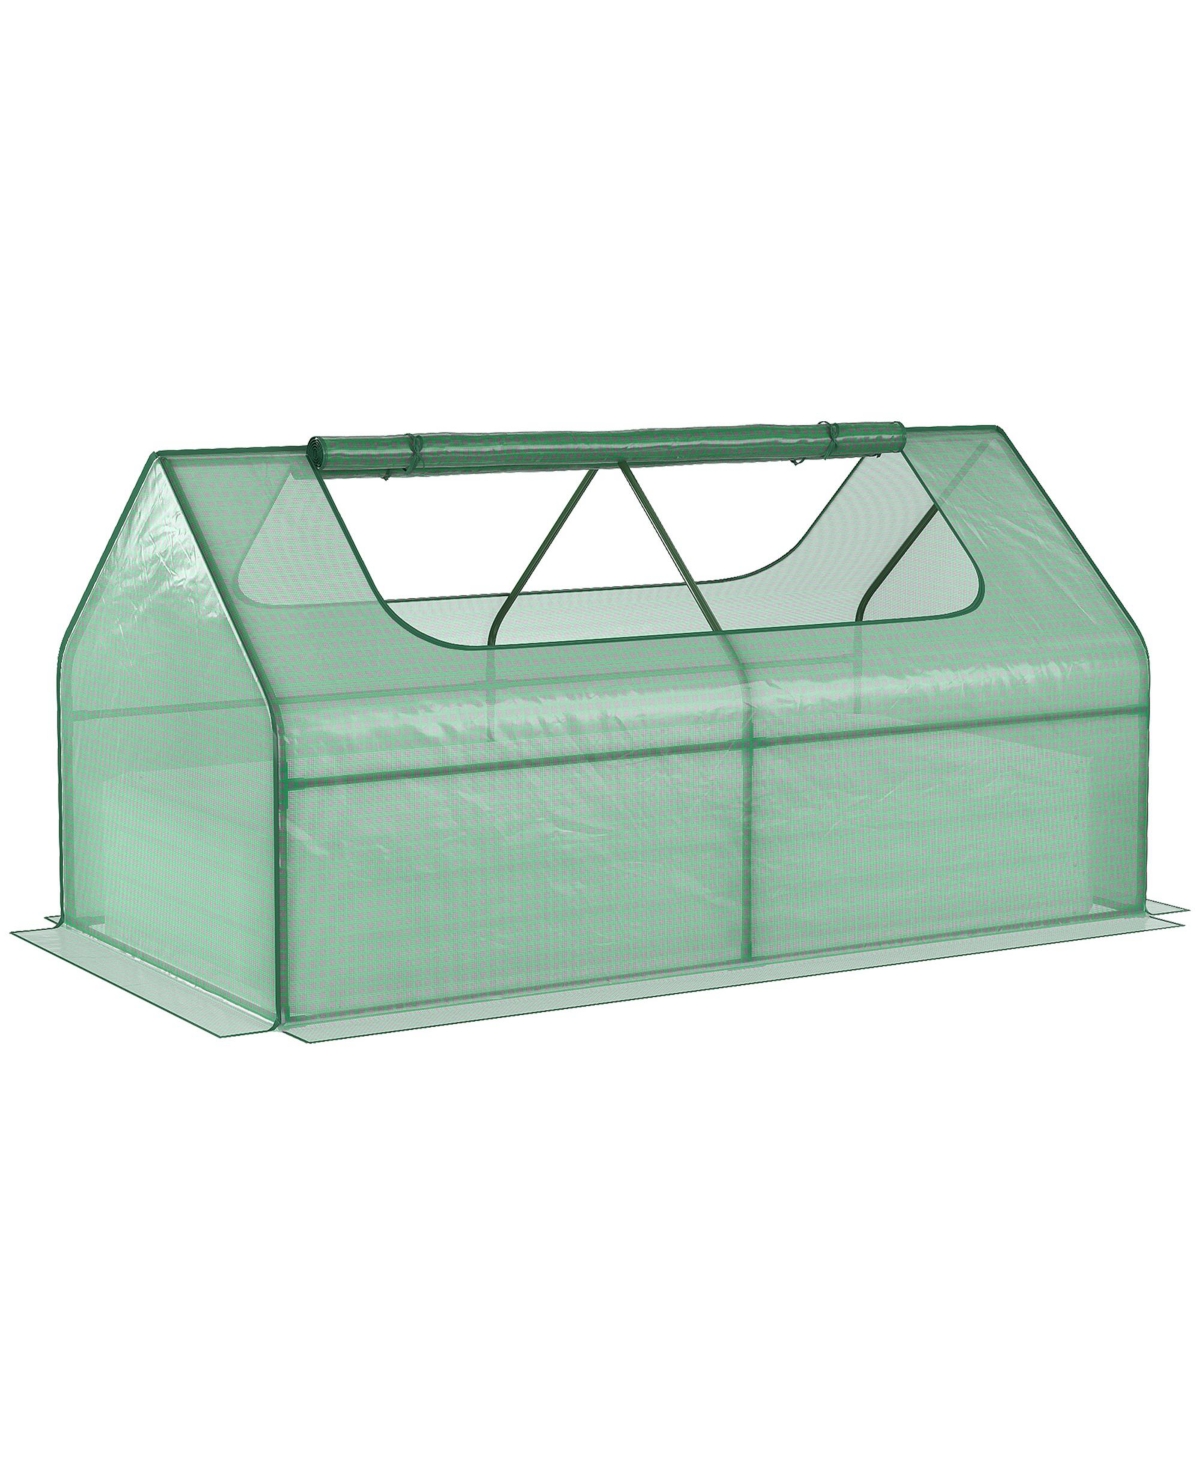 Galvanized Raised Garden Bed with Mini Greenhouse Cover, Outdoor Metal Planter Box with 2 Roll-Up Windows for Growing Flowers, Fruits, Vegeta